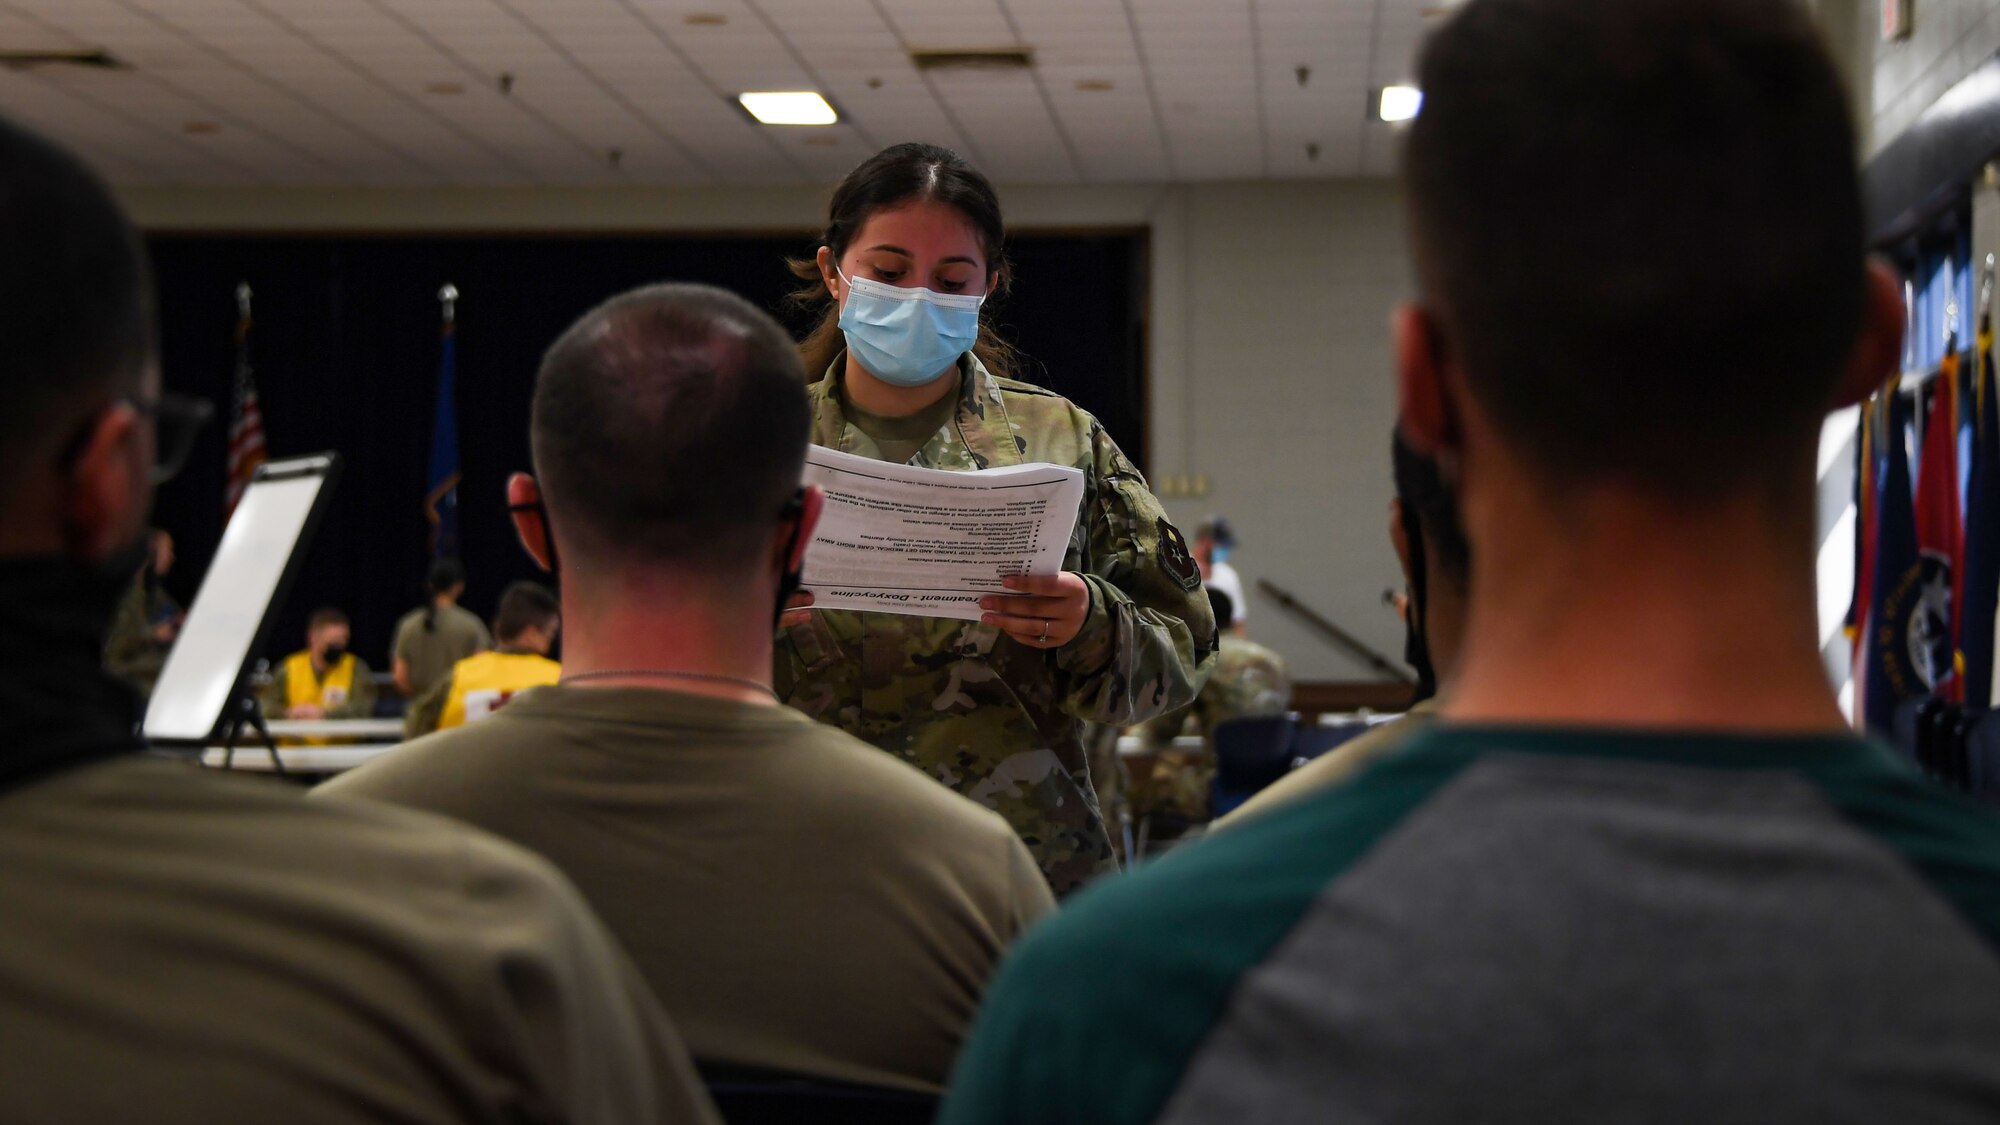 Senior Airman Sheily Sotelo Valencia goes over information on Anthrax with a group of Airmen during a Ready Eagle exercise